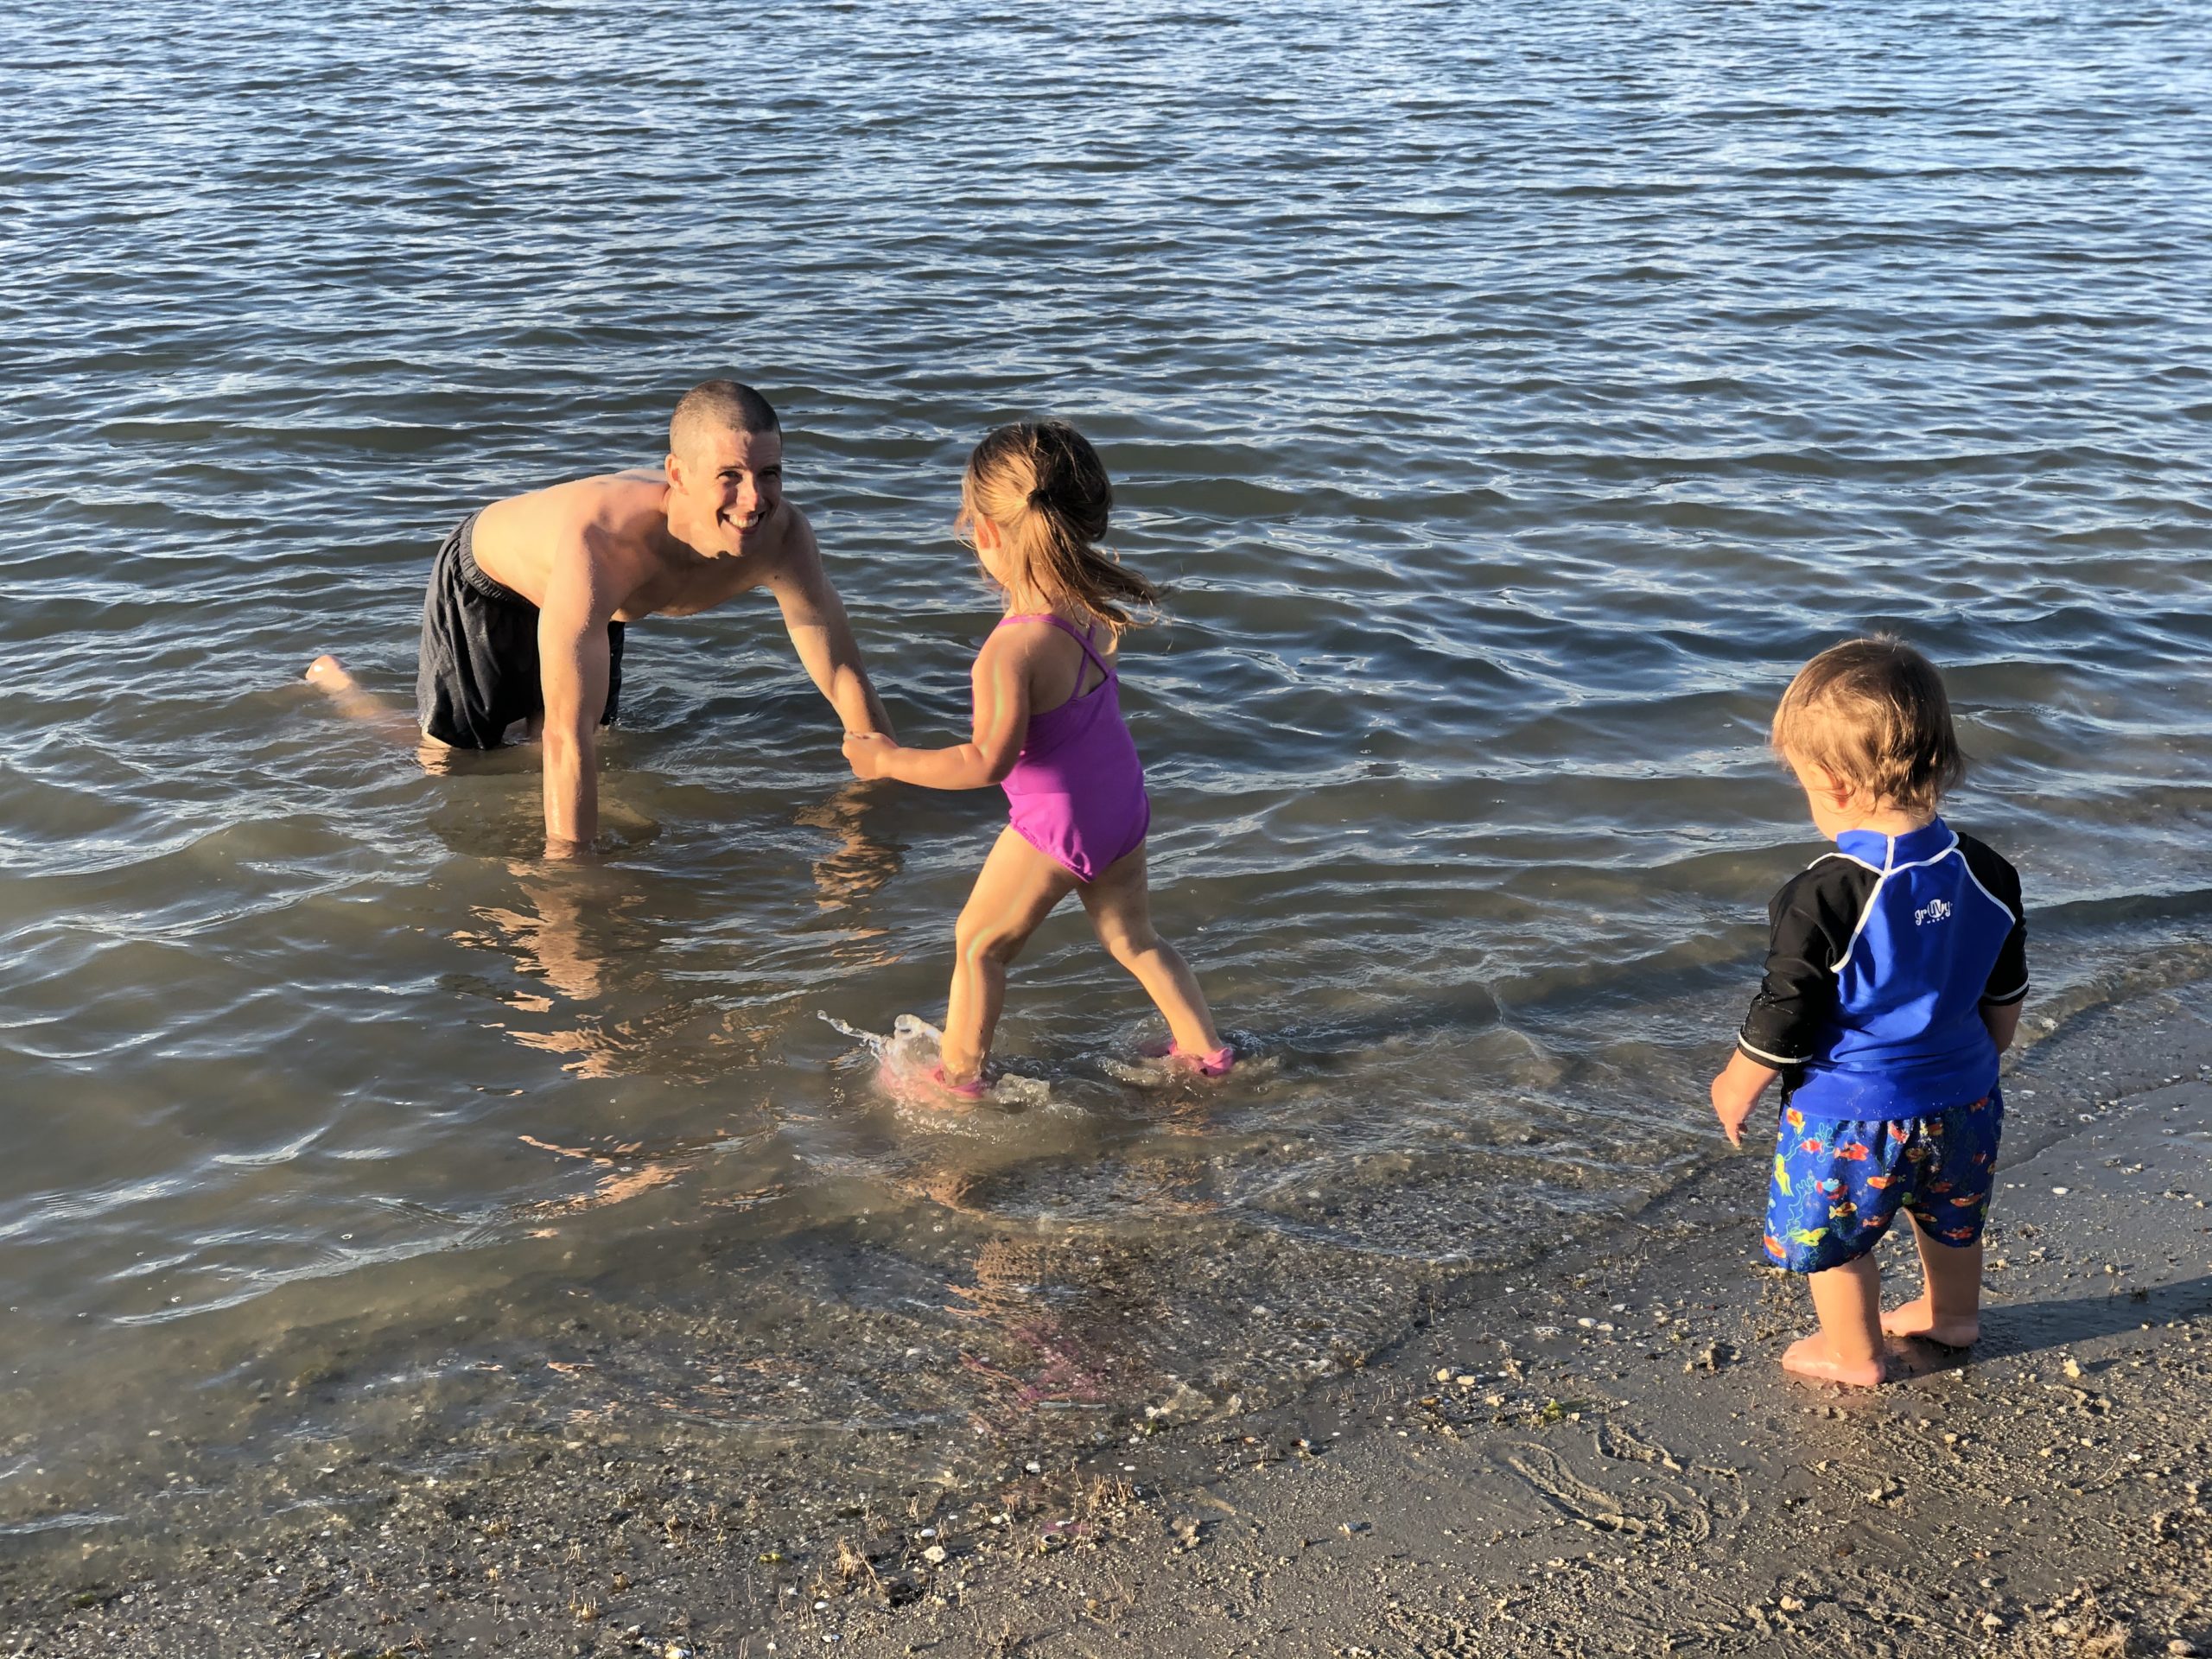 John and the kids playing in the lake